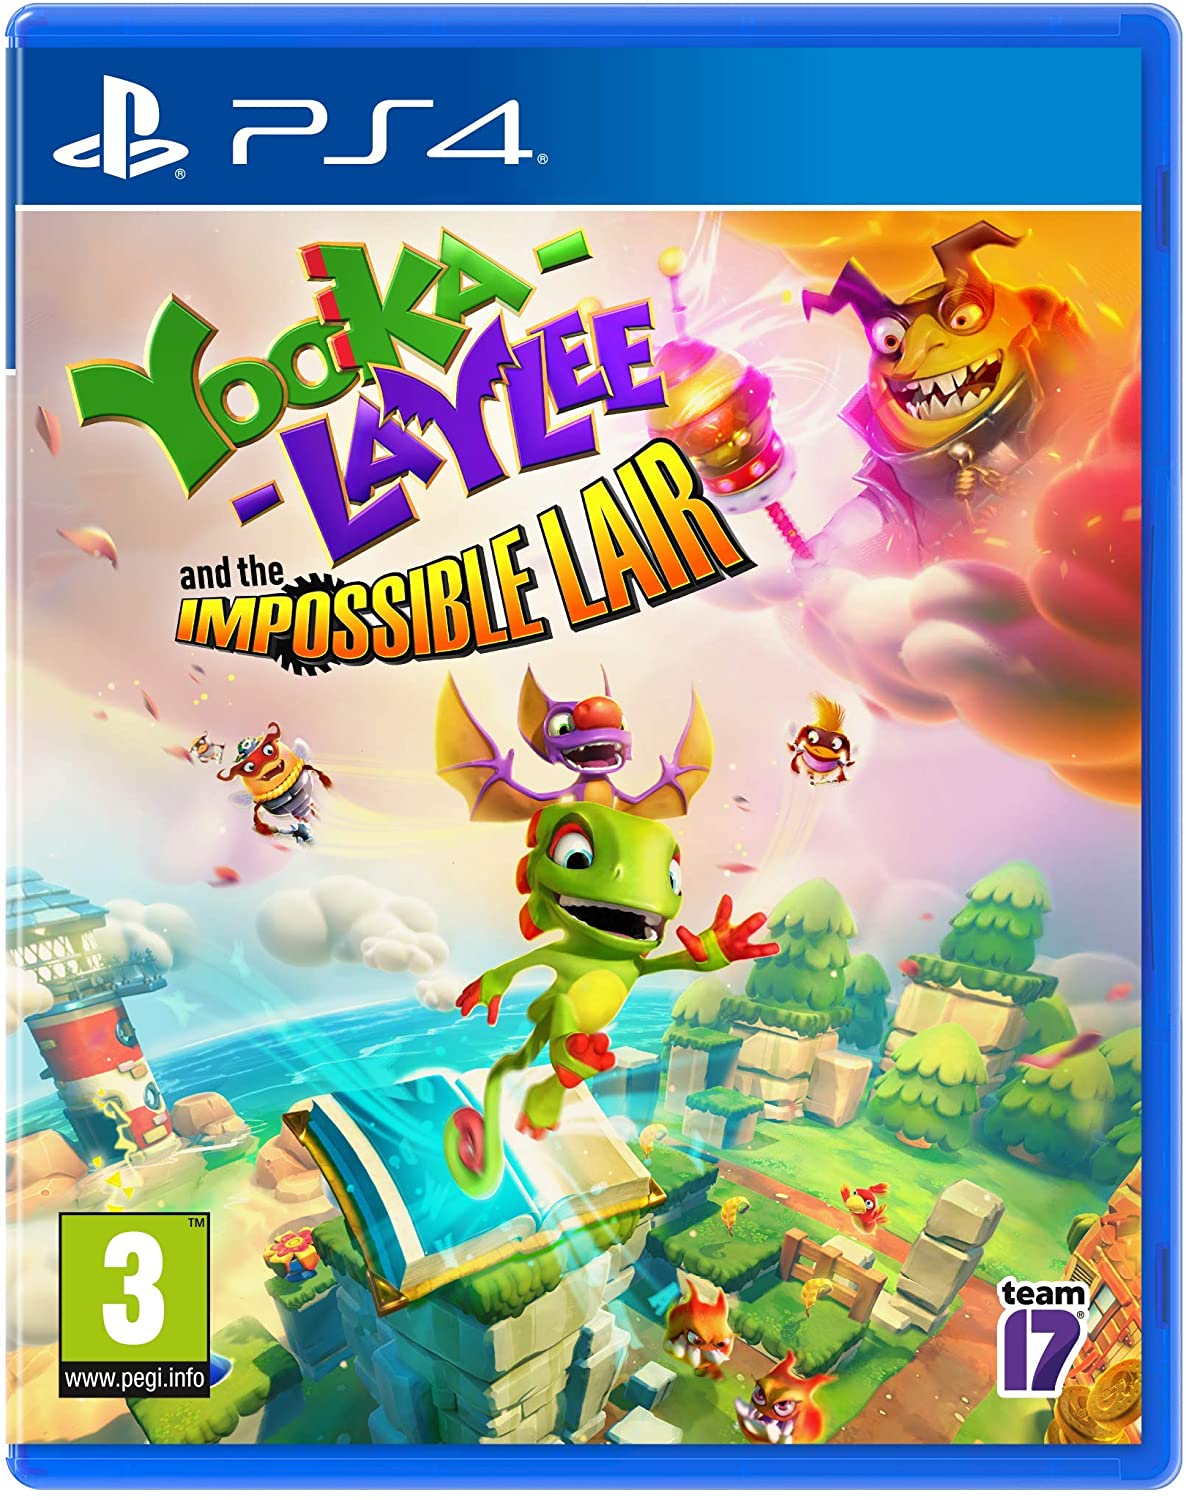 Yooka-Laylee and the Impossible Lair - PS4 | Yard's Games Ltd